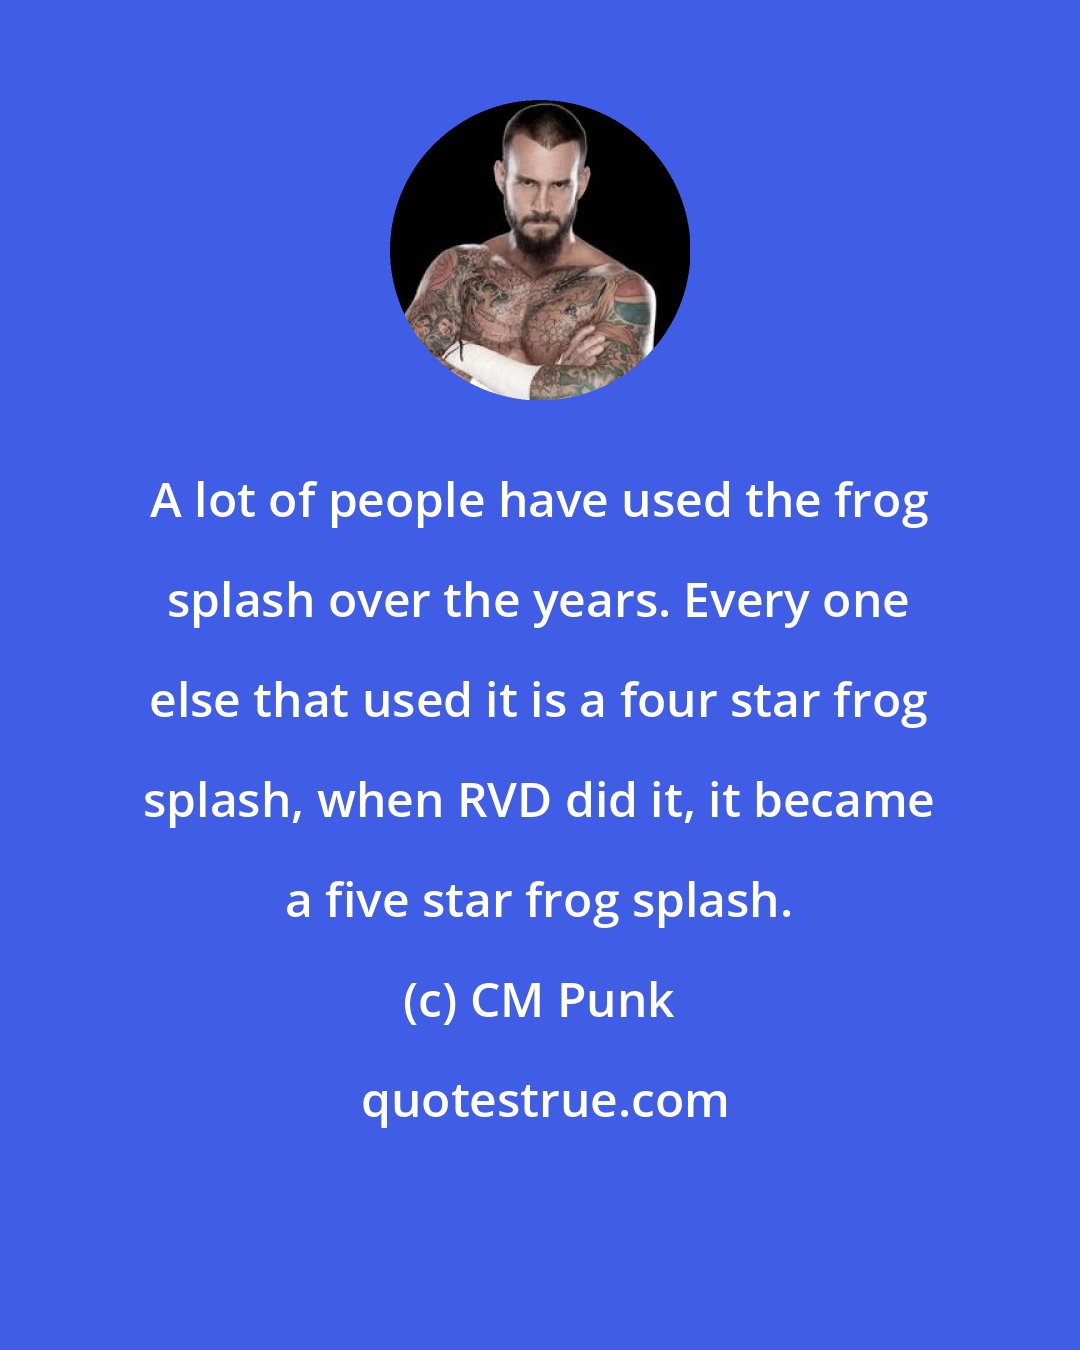 CM Punk: A lot of people have used the frog splash over the years. Every one else that used it is a four star frog splash, when RVD did it, it became a five star frog splash.